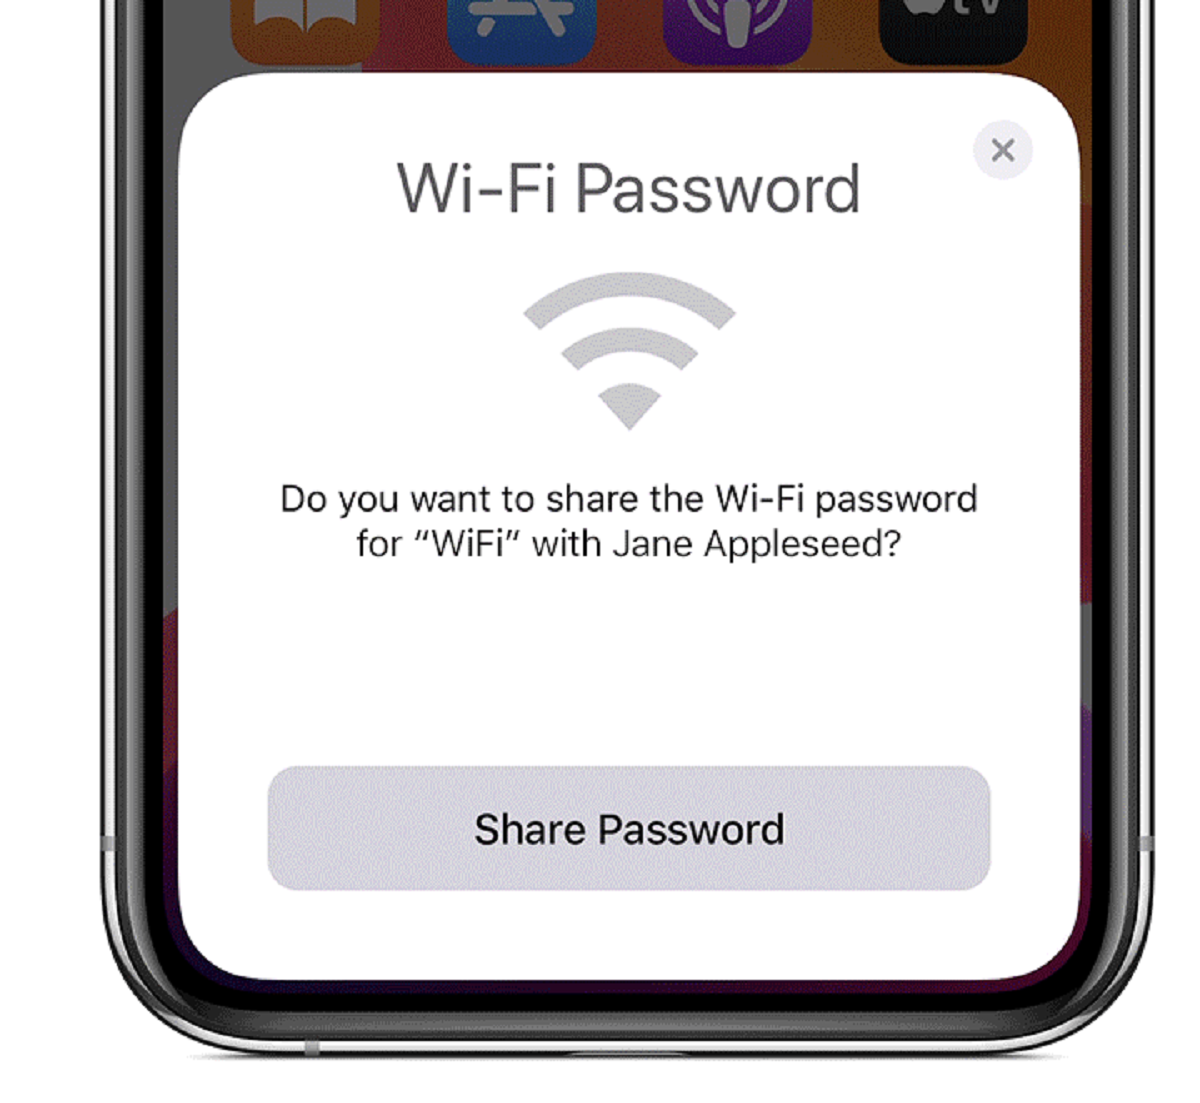 how-to-connect-wifi-without-password